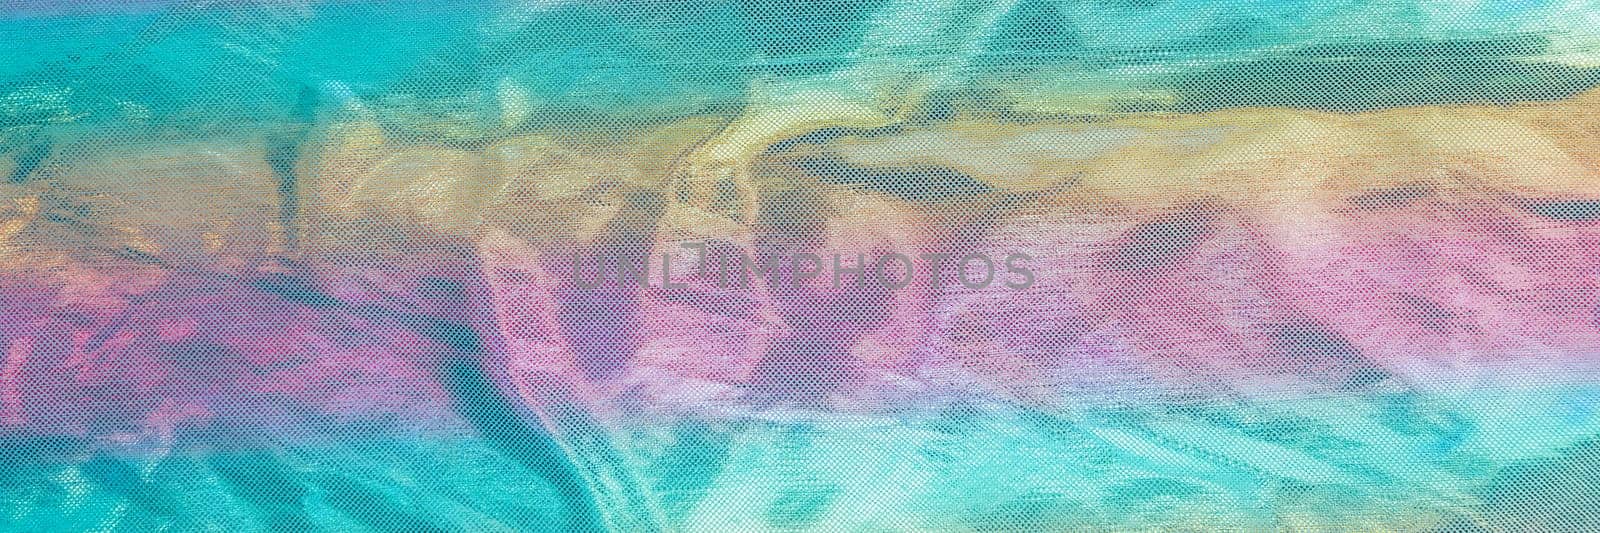 Blurred rainbow light refraction texture overlay effect for photo and mockups. holographic flare,holographic style texture background reflective fabric by YuliaYaspe1979